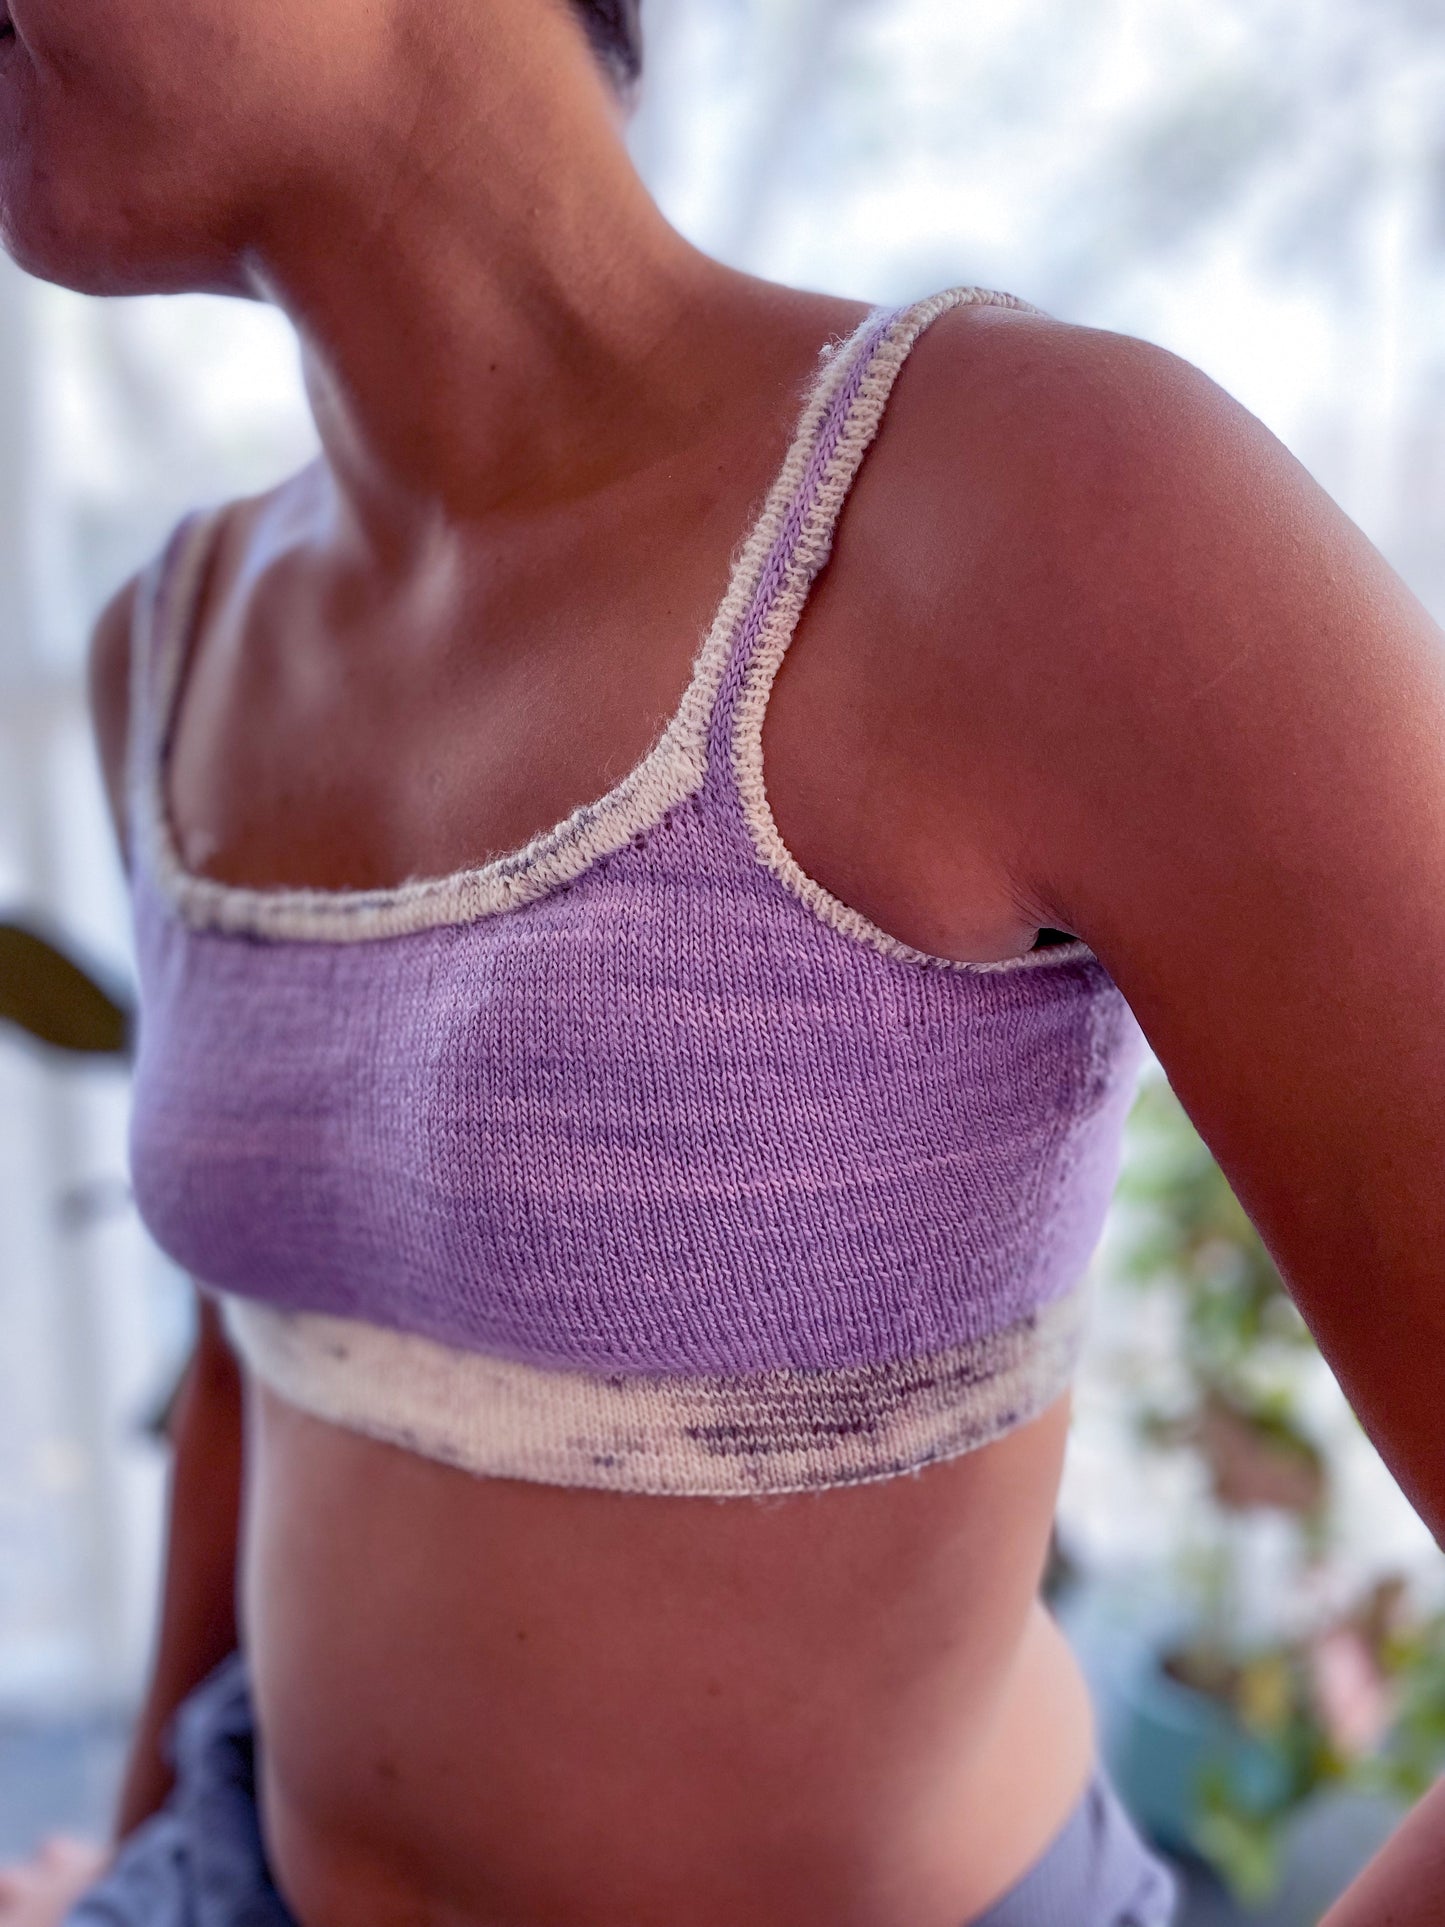 Seen close up, Candace wears a light purple bralette, knit with a contrasting speckled white band and straps. Houseplants can be seen in the background.